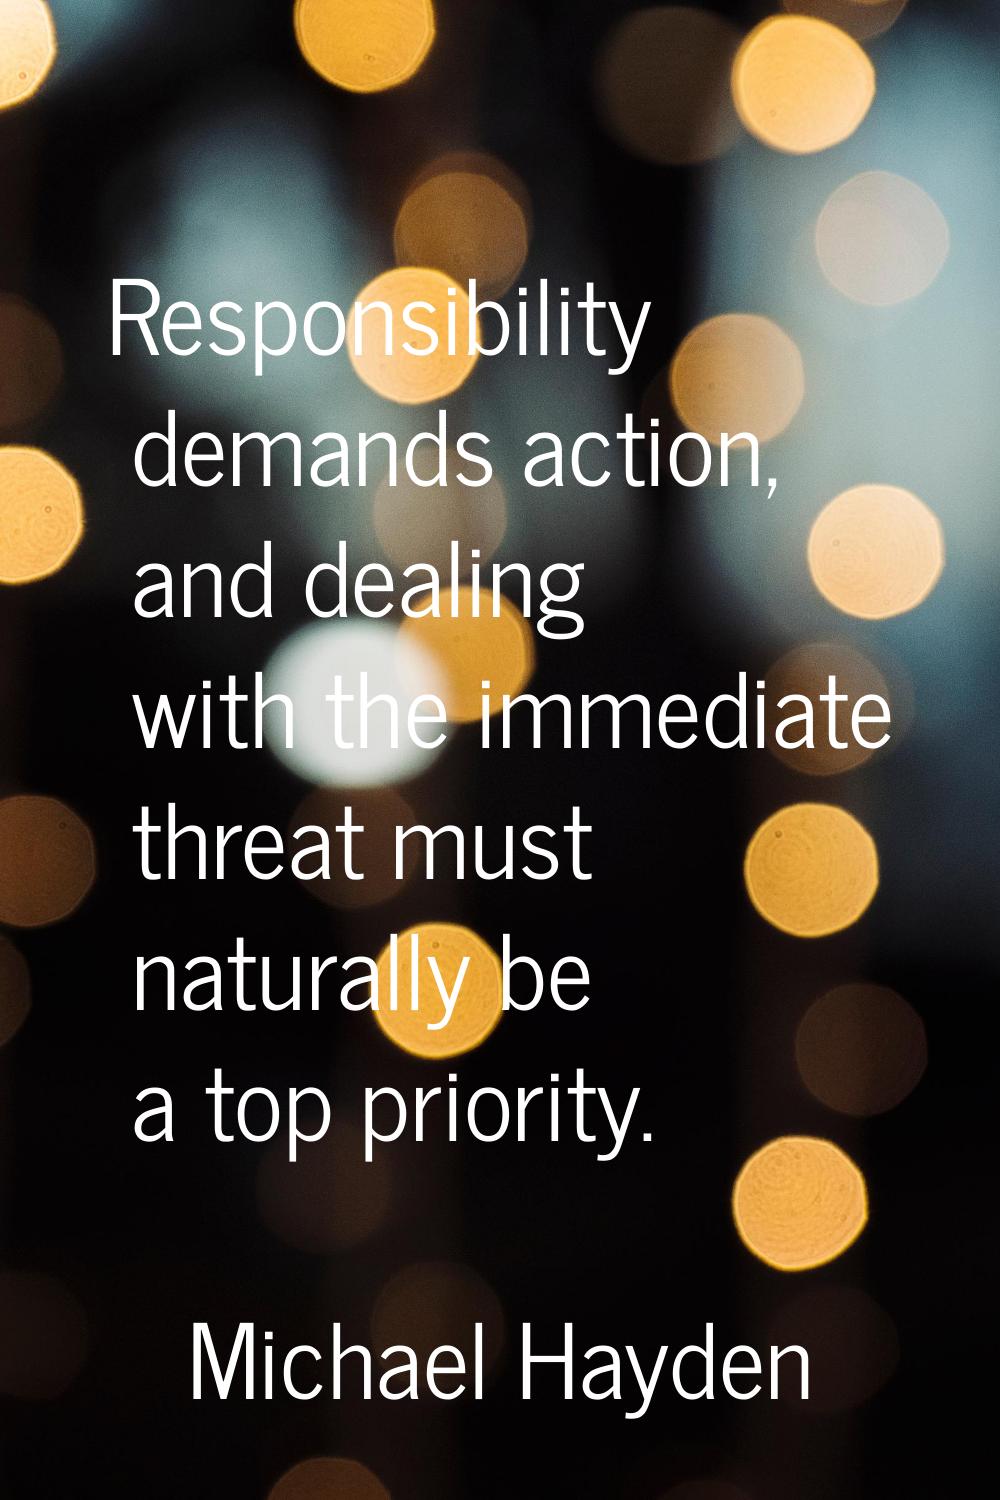 Responsibility demands action, and dealing with the immediate threat must naturally be a top priori